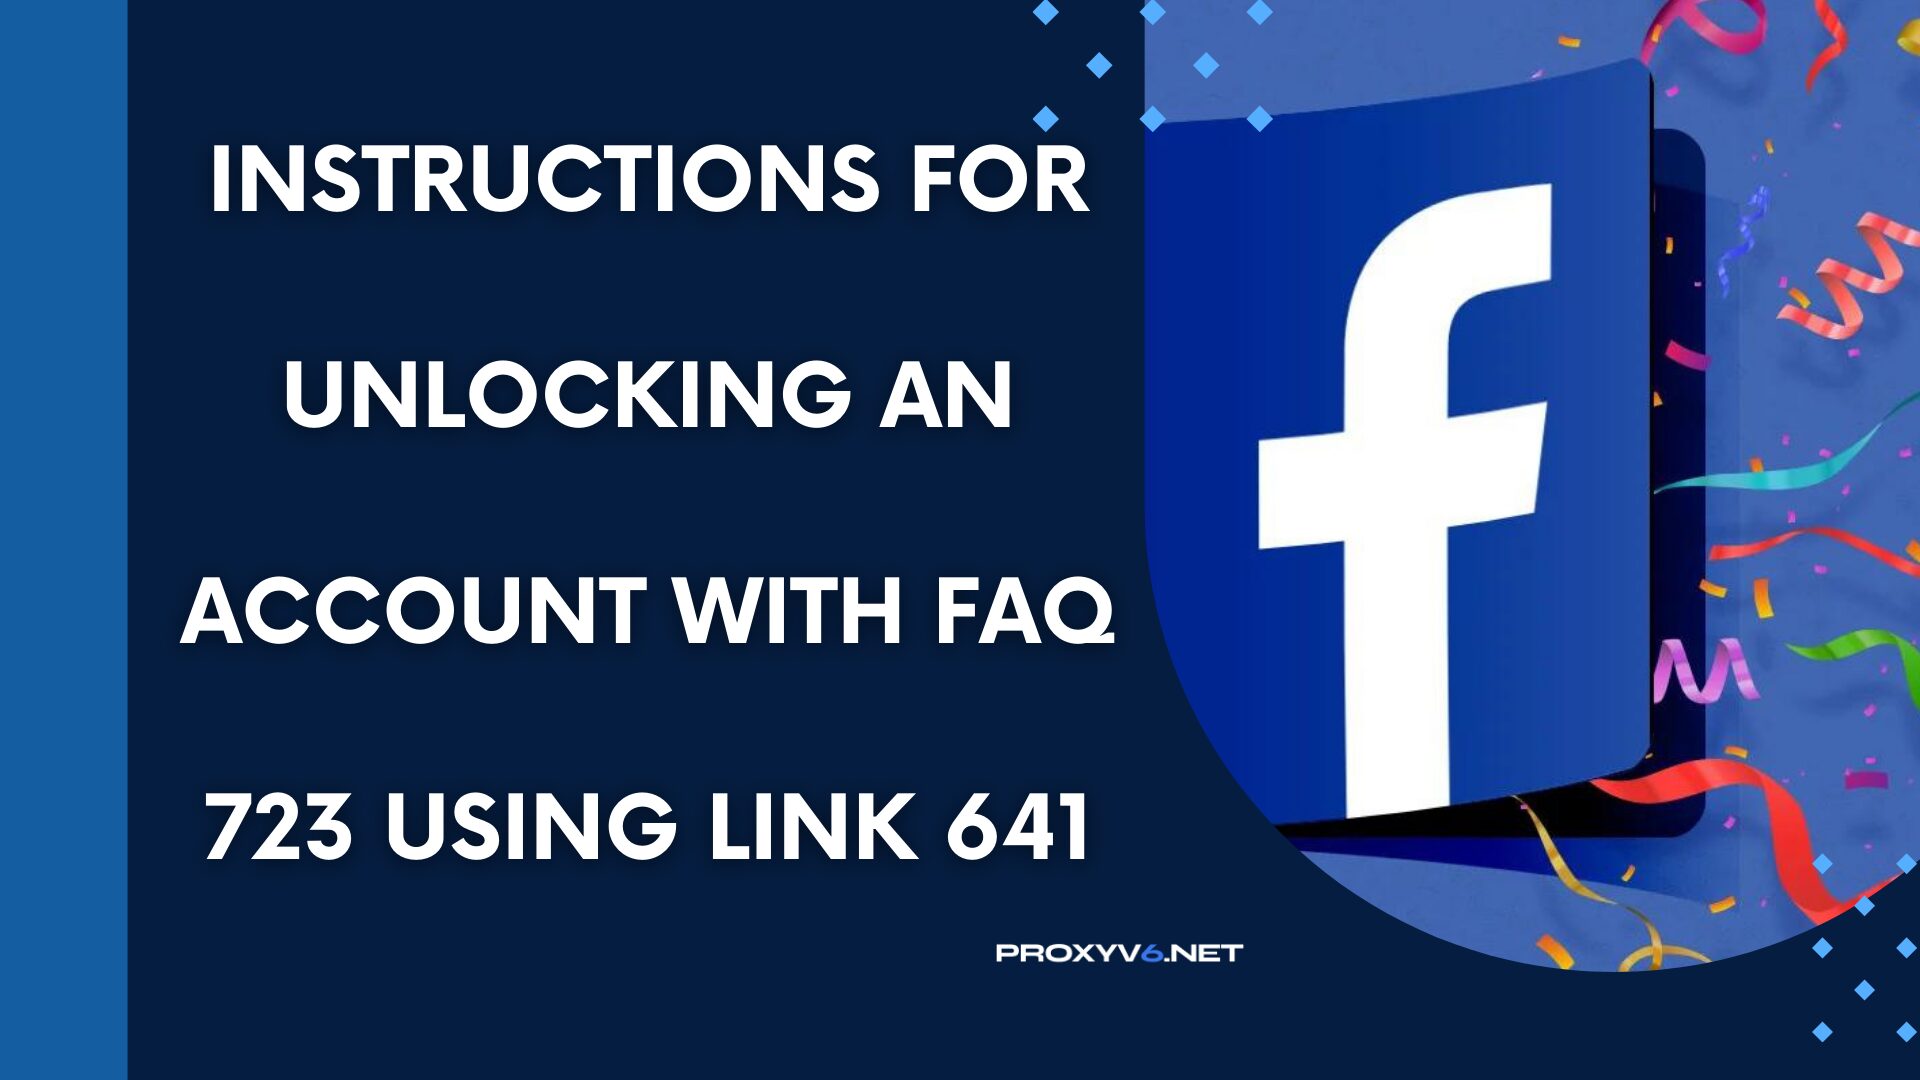 Instructions for unlocking an account with FAQ 723 using Link 641